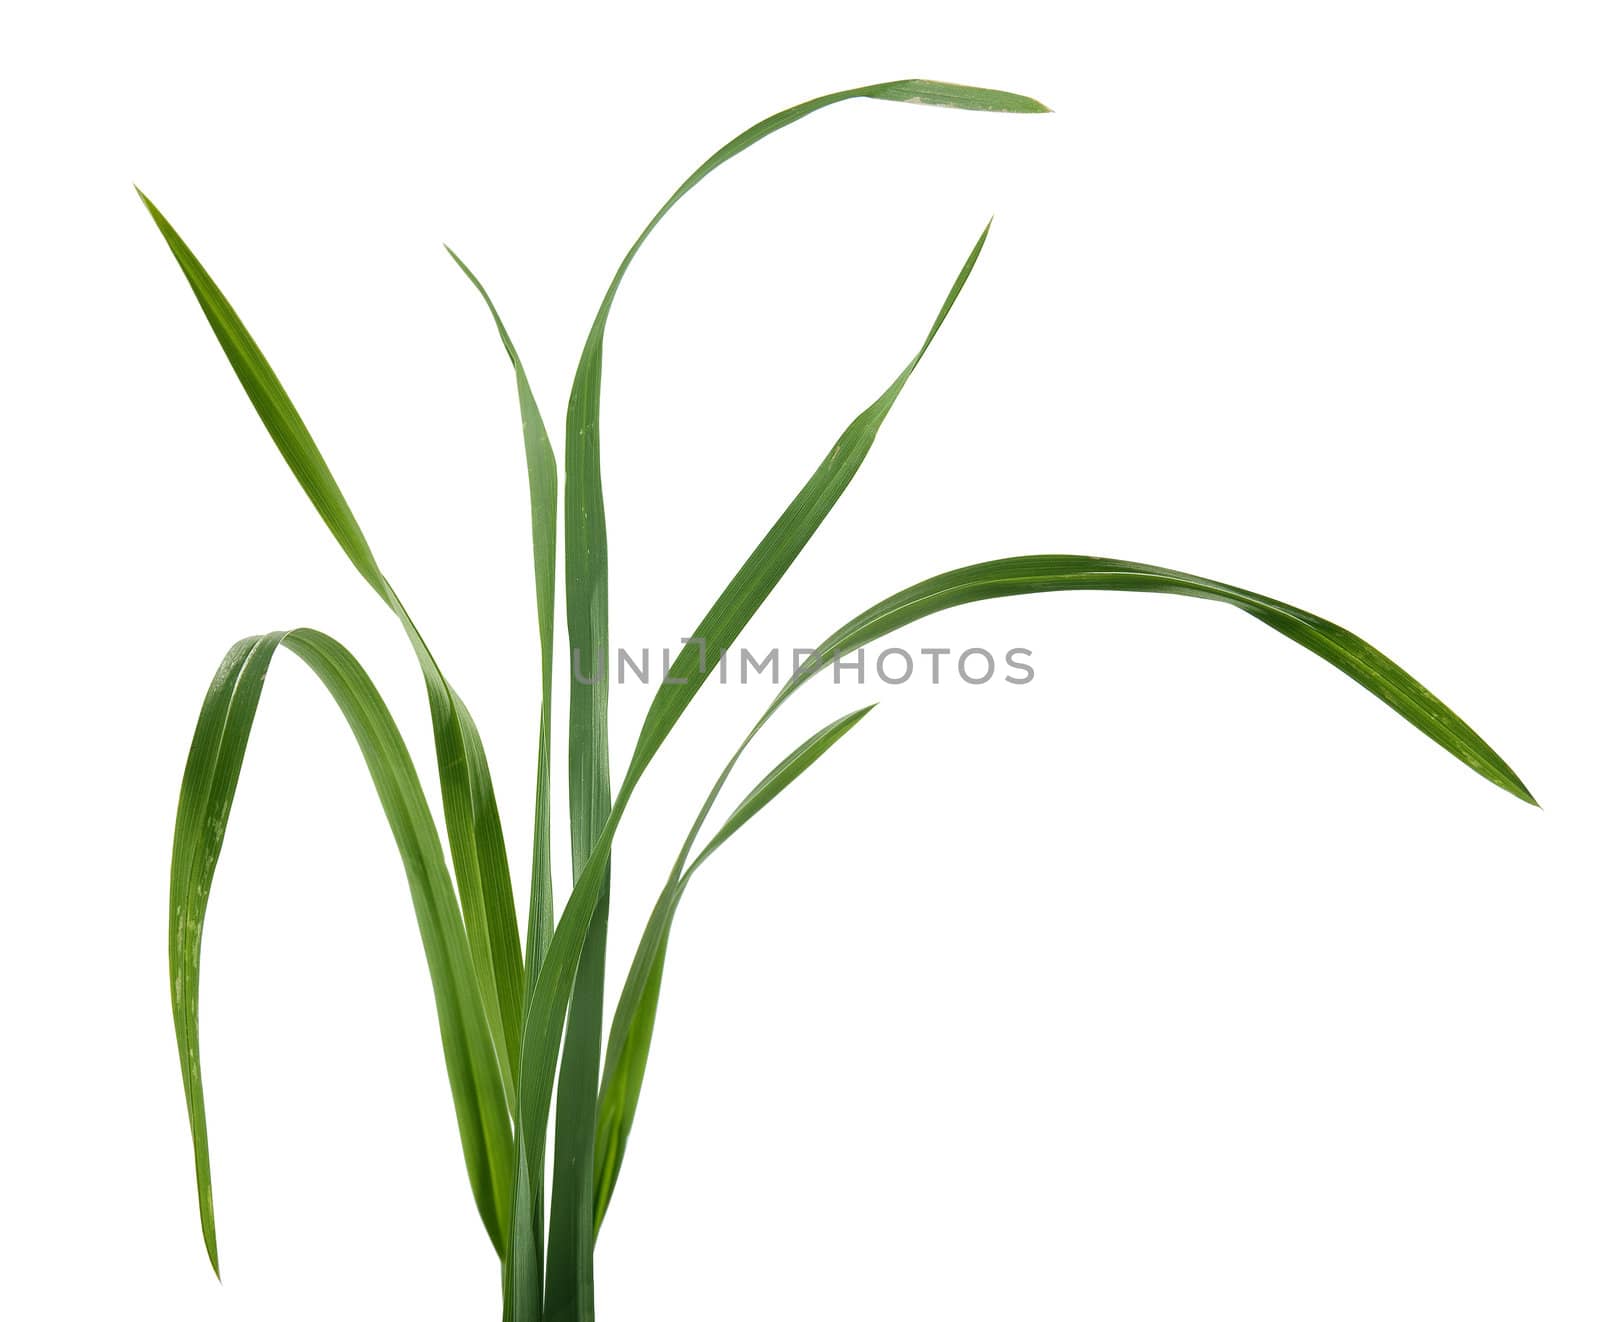 Some isolated fresh green blades of grass